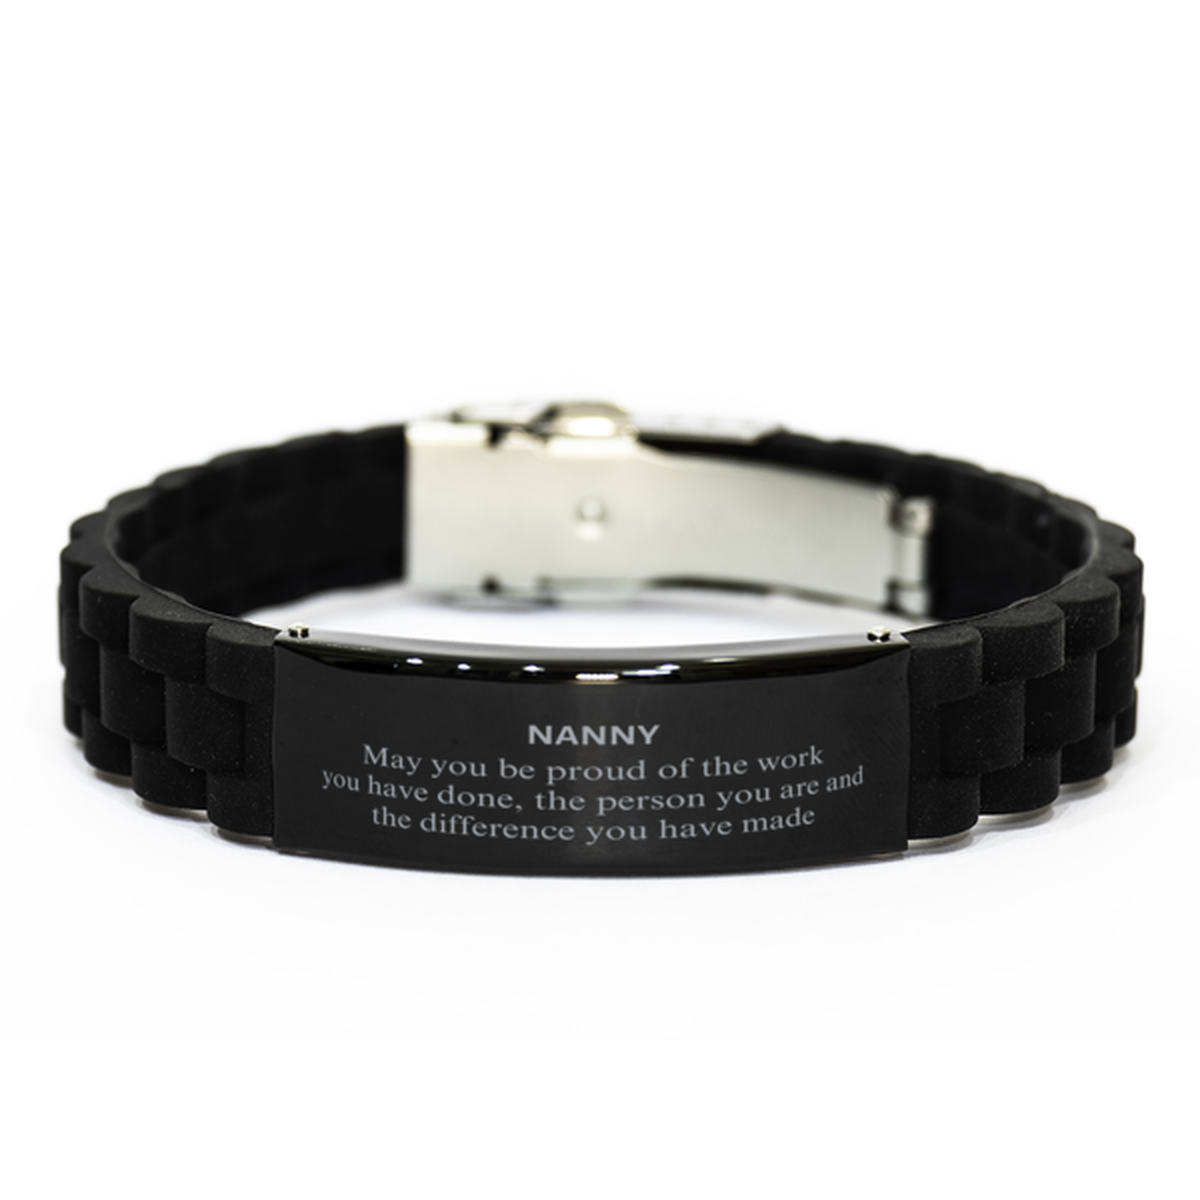 Nanny May you be proud of the work you have done, Retirement Nanny Black Glidelock Clasp Bracelet for Colleague Appreciation Gifts Amazing for Nanny